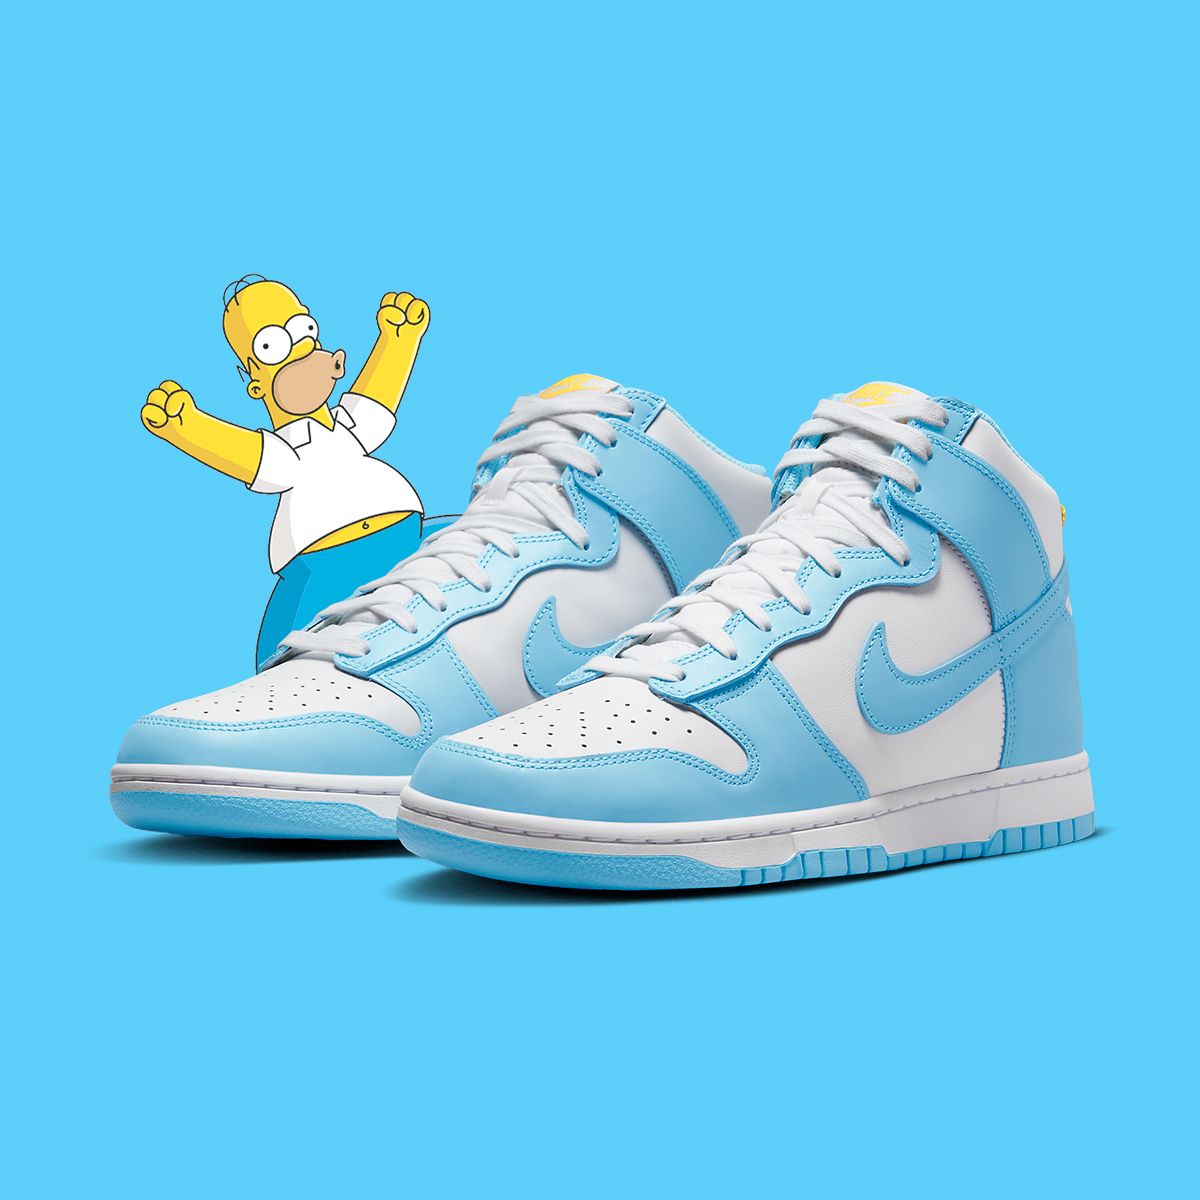 forgiven Unfortunately Bog Where to Buy the Nike Dunk High "Blue Chill" (Homer Simpson) | HOUSE OF HEAT